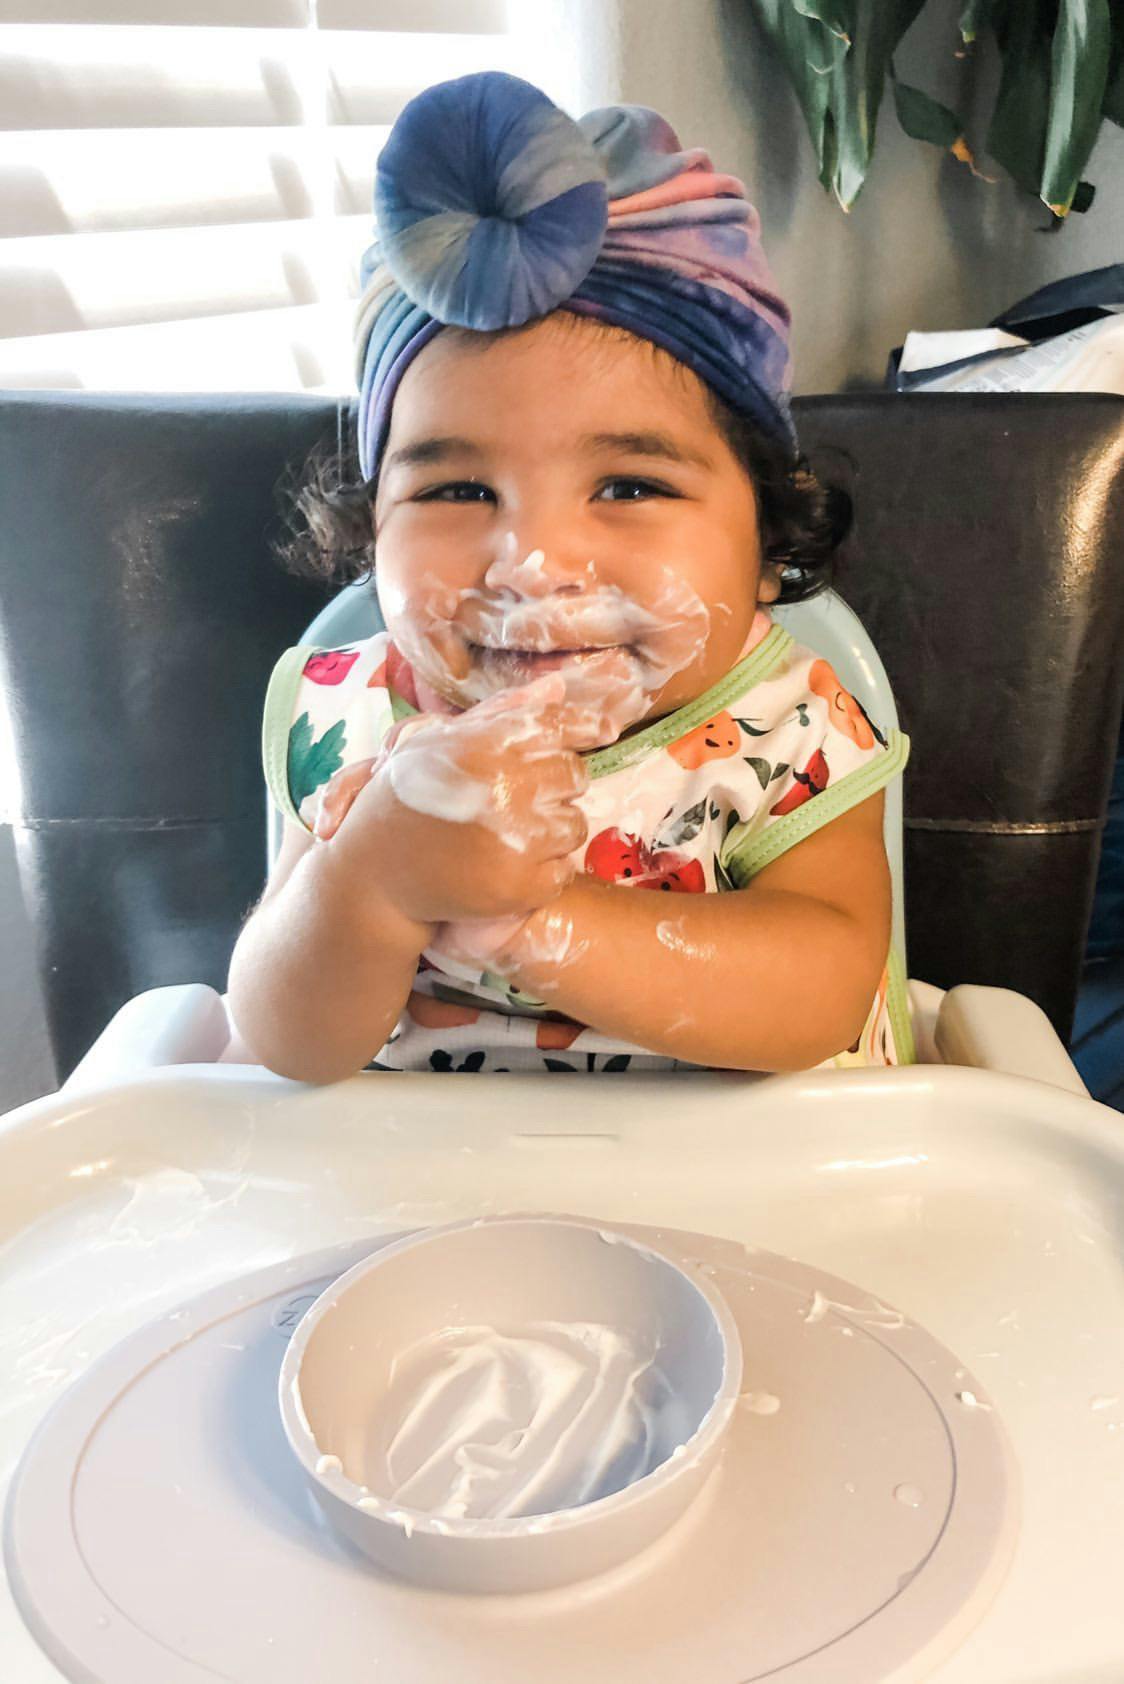 Baby seated in high chair with an empty bowl of yogurt in the foreground, messy yogurt smile face